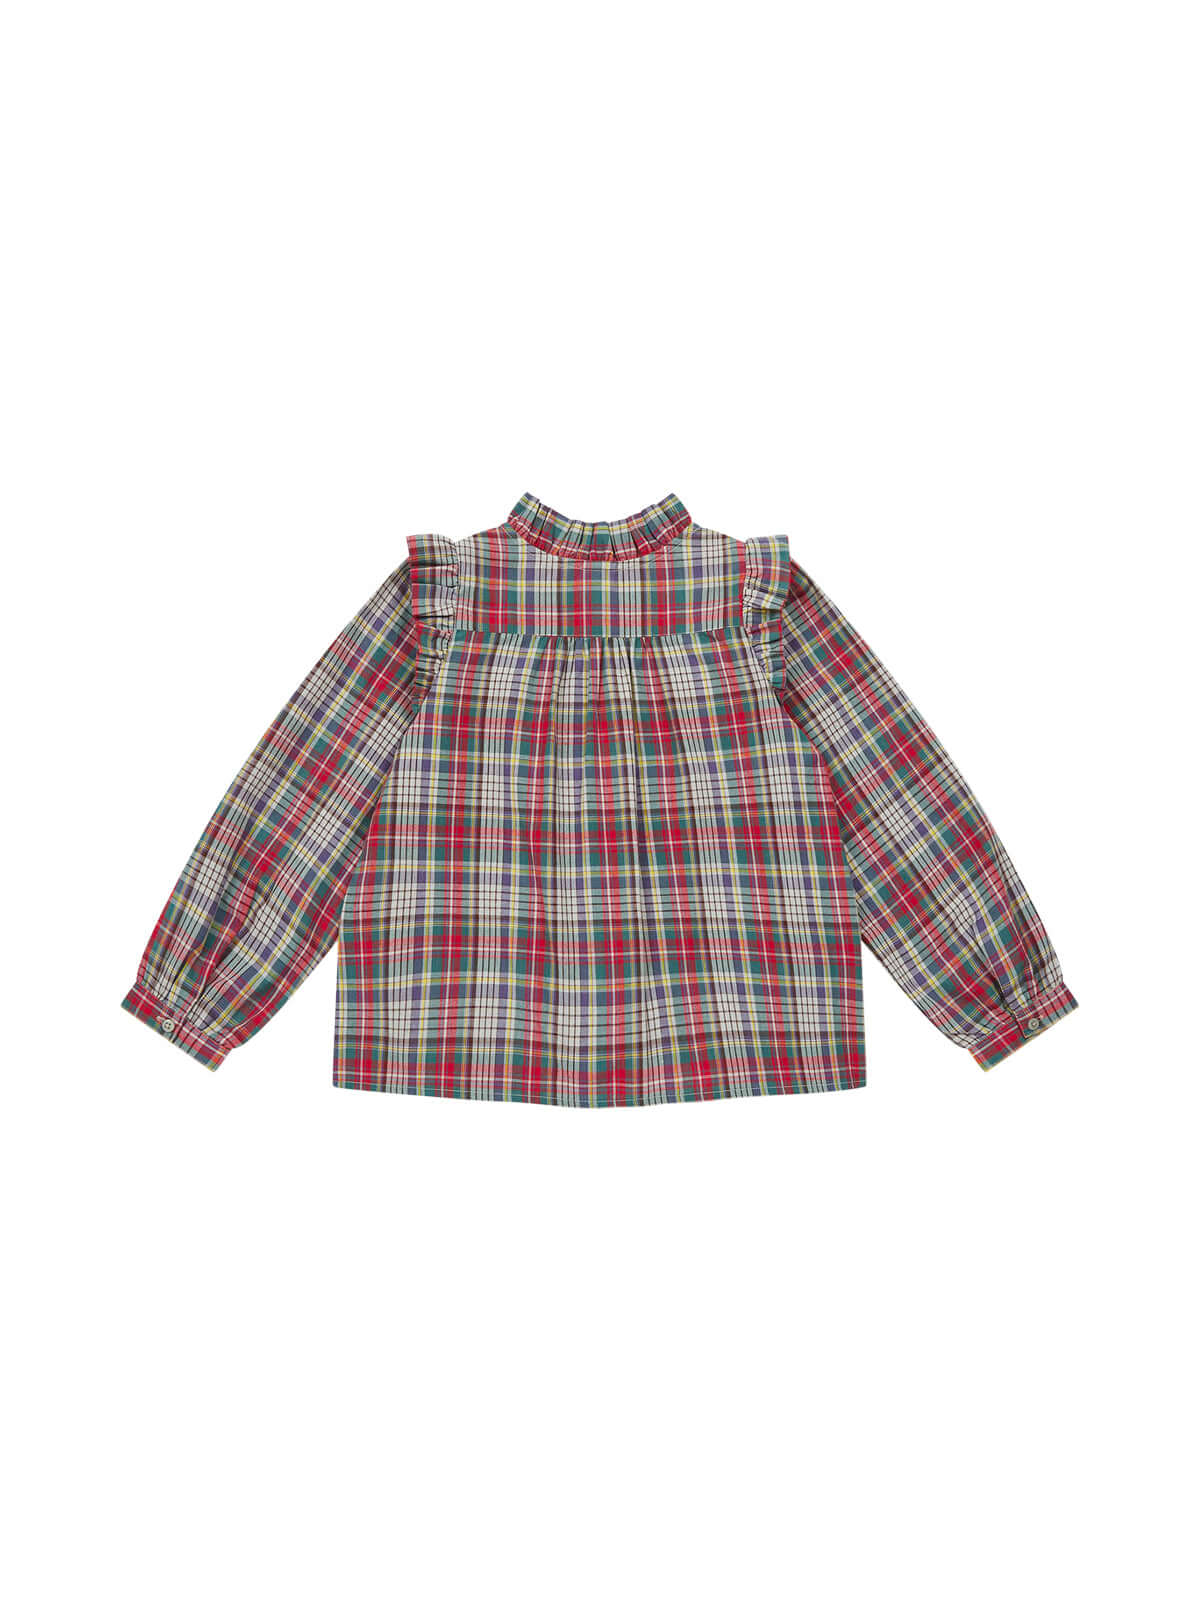 Girls red plaid blouse